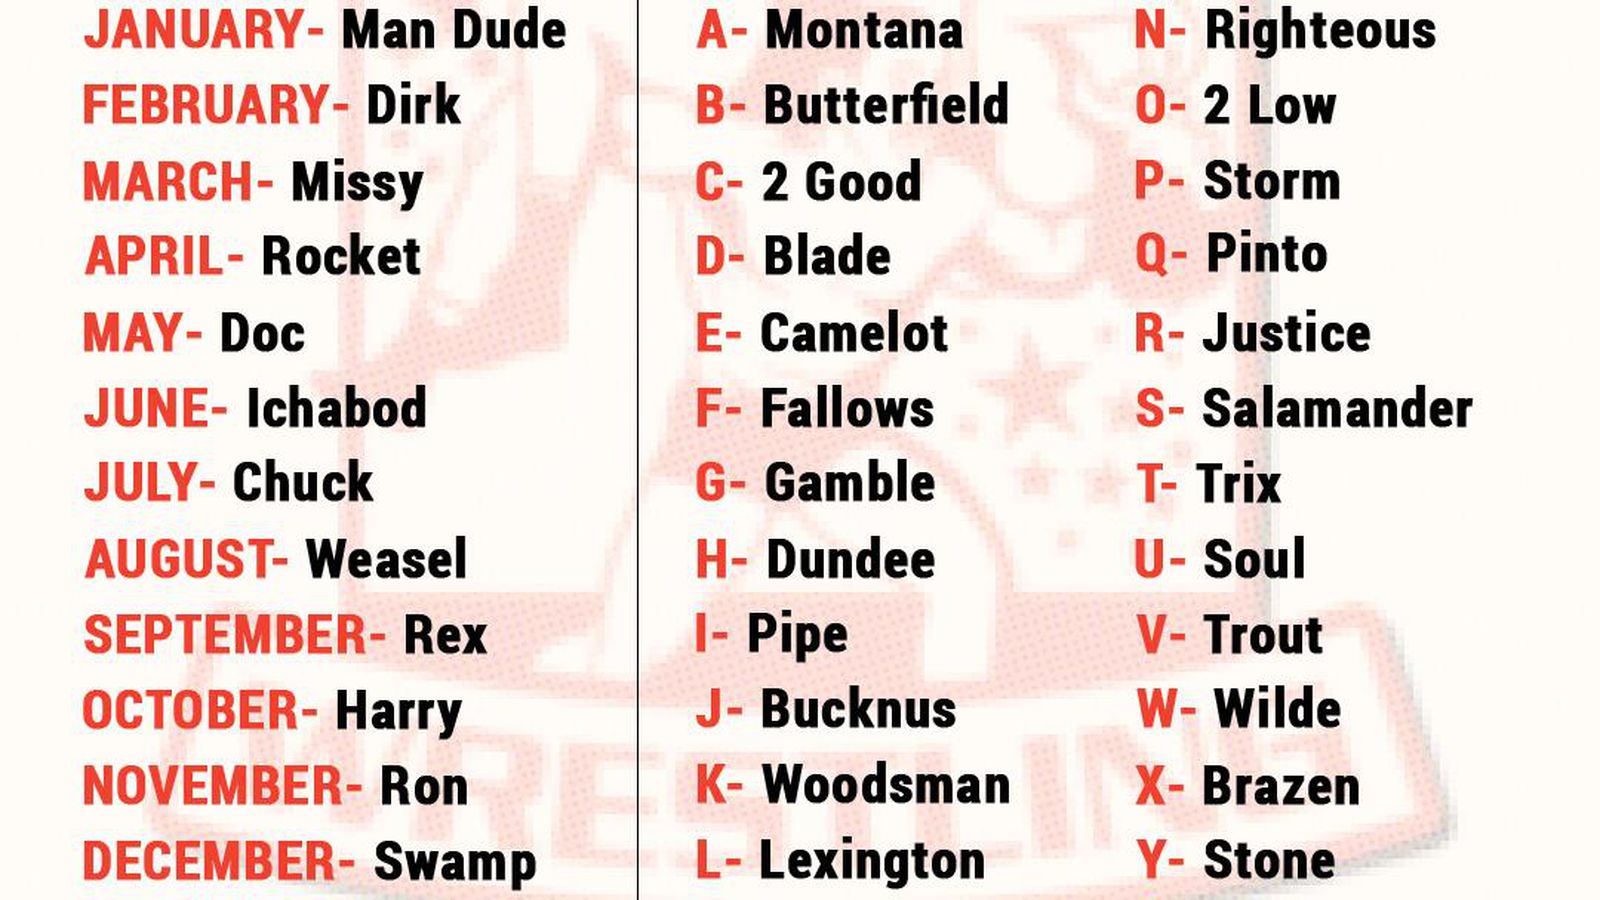 Fulfill Lover recorder My Southpaw Regional Wrestling name is better than yours - Cageside Seats